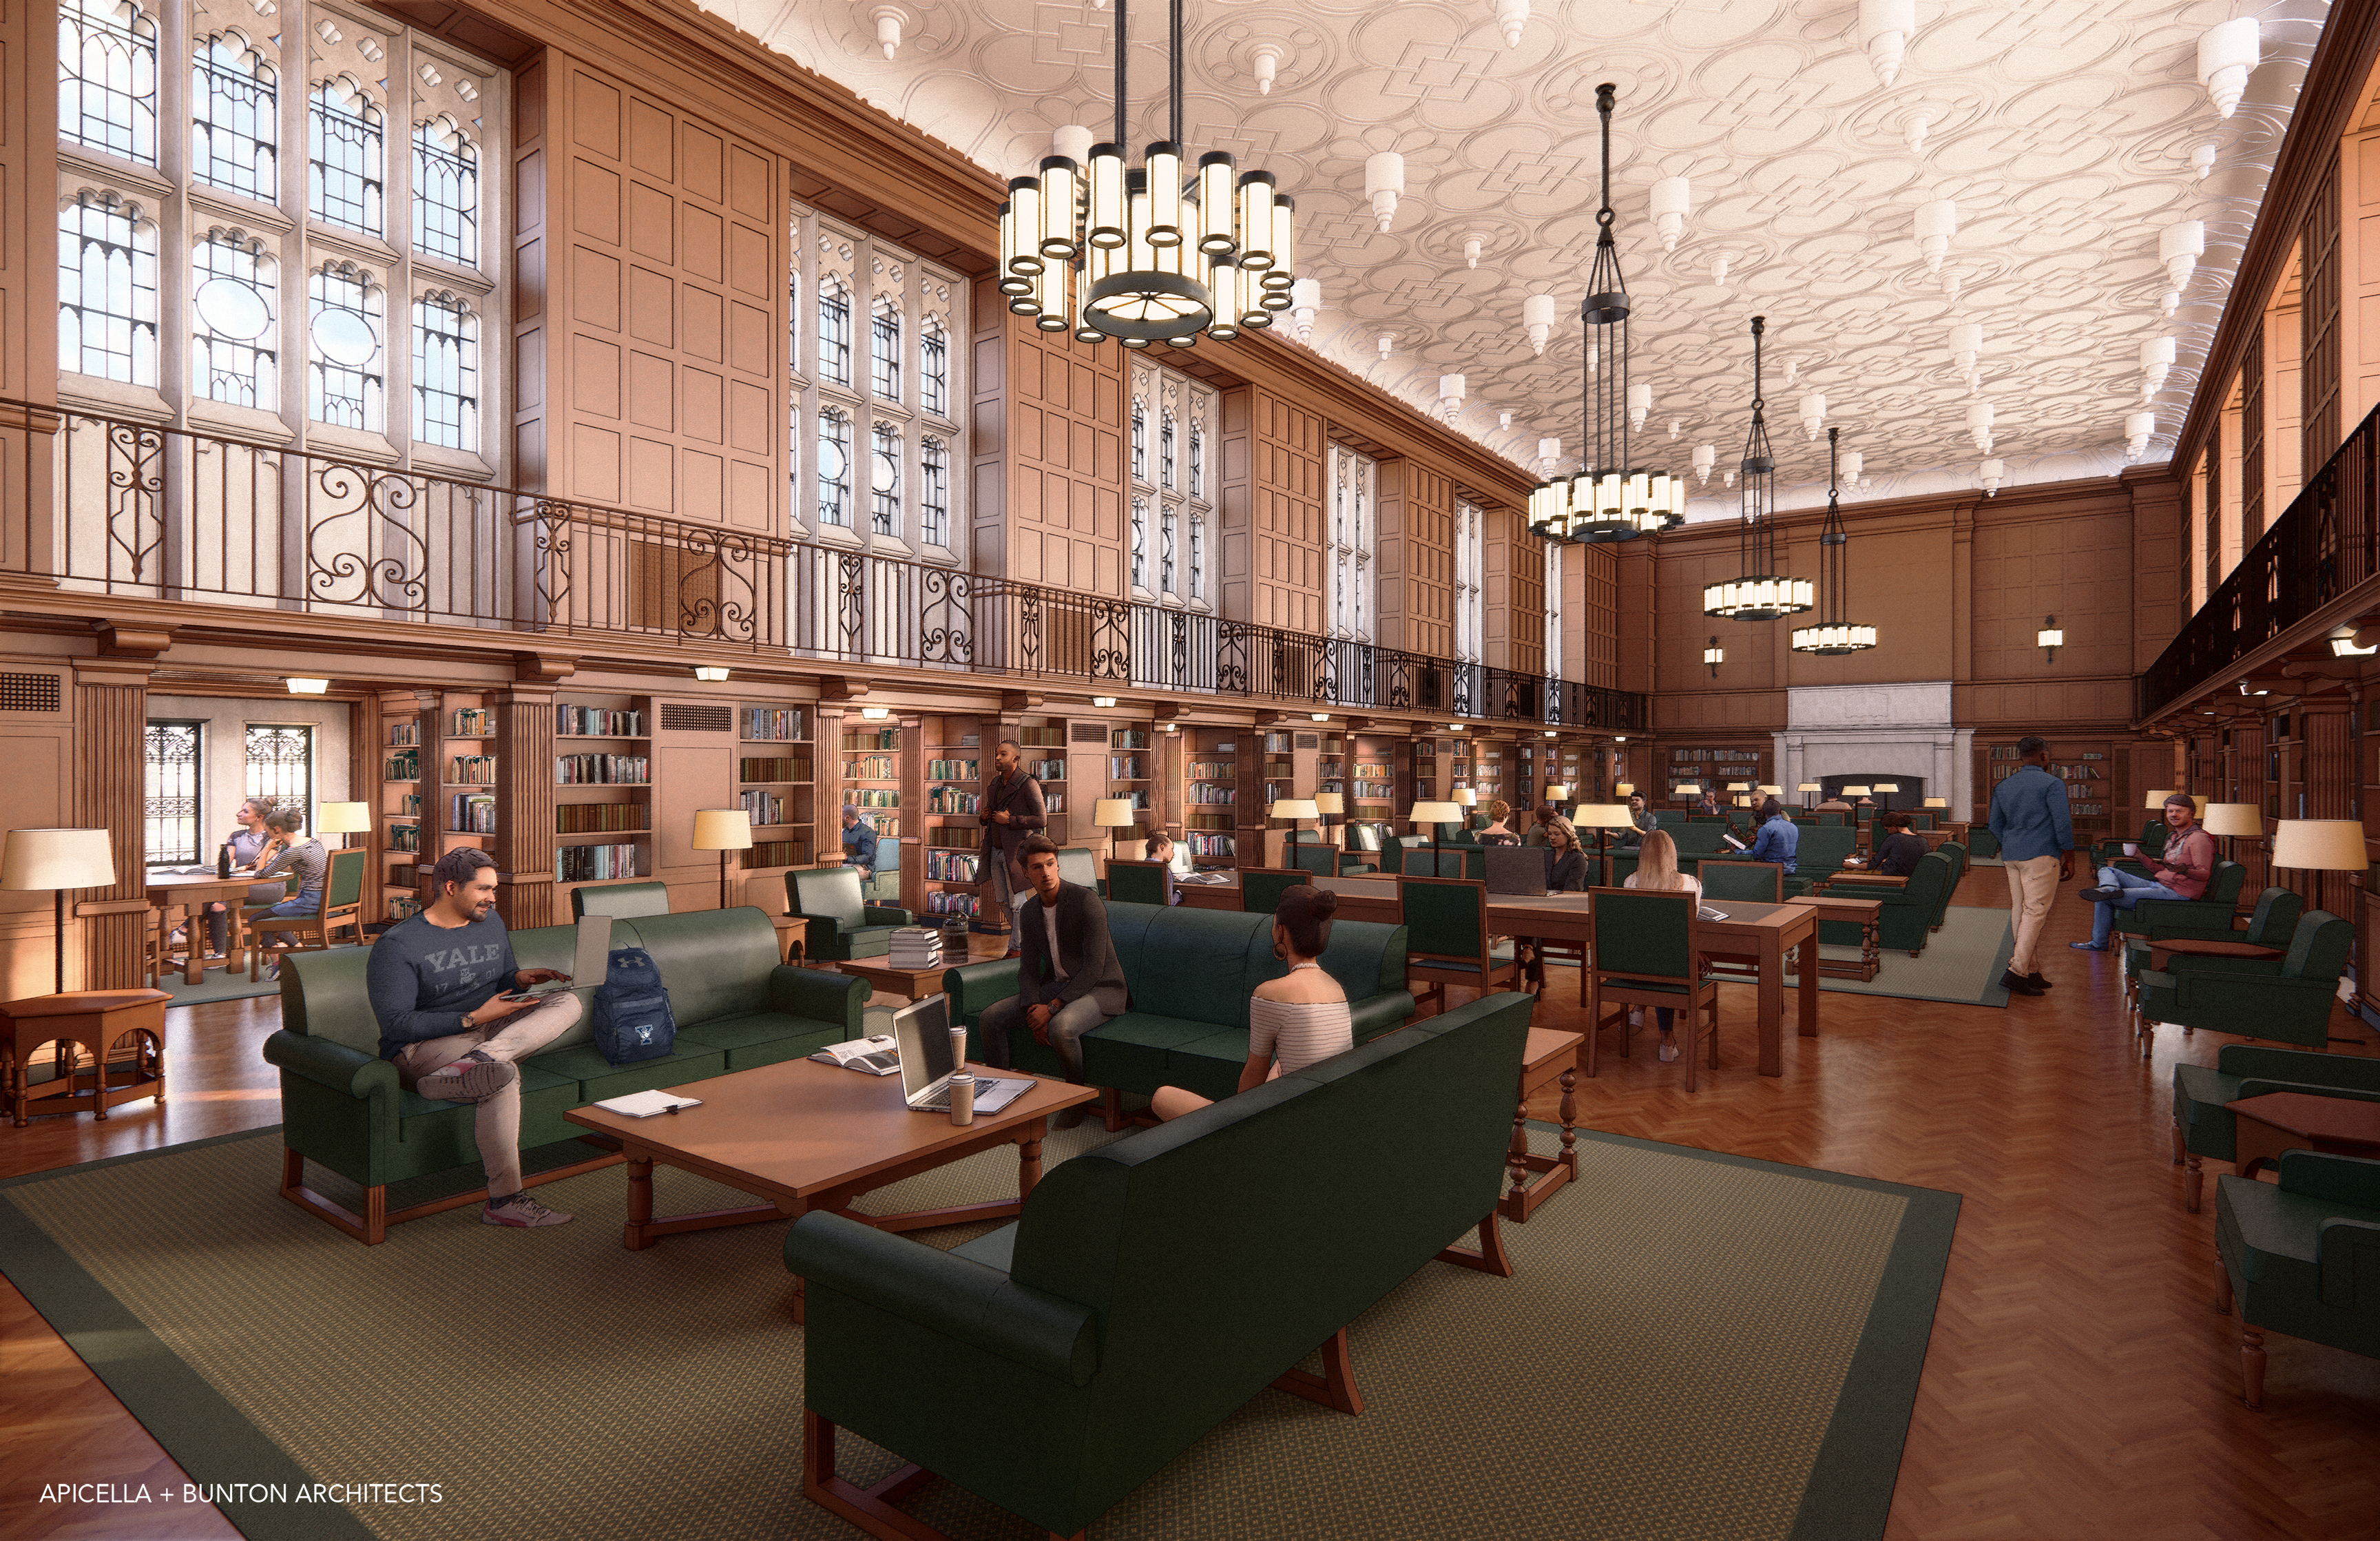 Architect's rendering of high-ceilinged, booklined reading room with Gothic windows, chandeliers green couches and library tables 